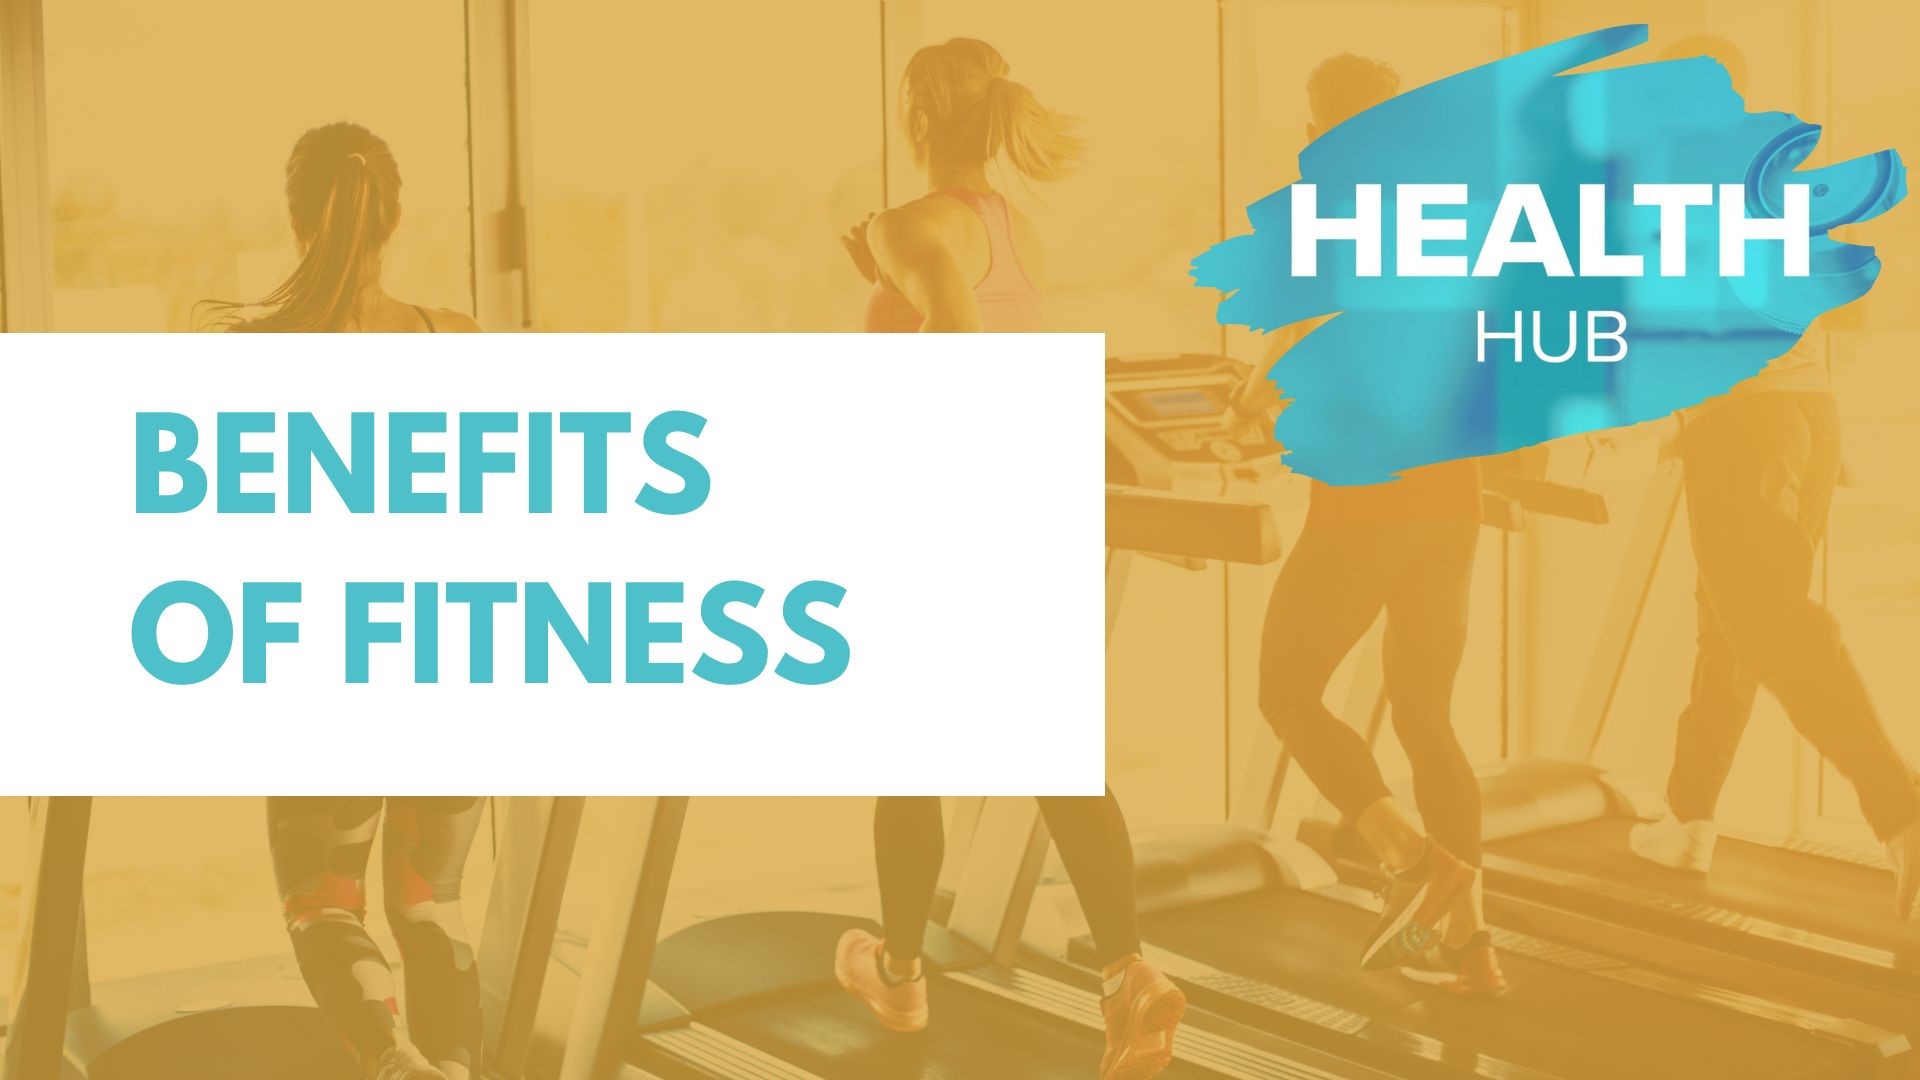 Exploring the benefits of fitness; from helping with dementia and old age to growing muscles and alleviating pain.